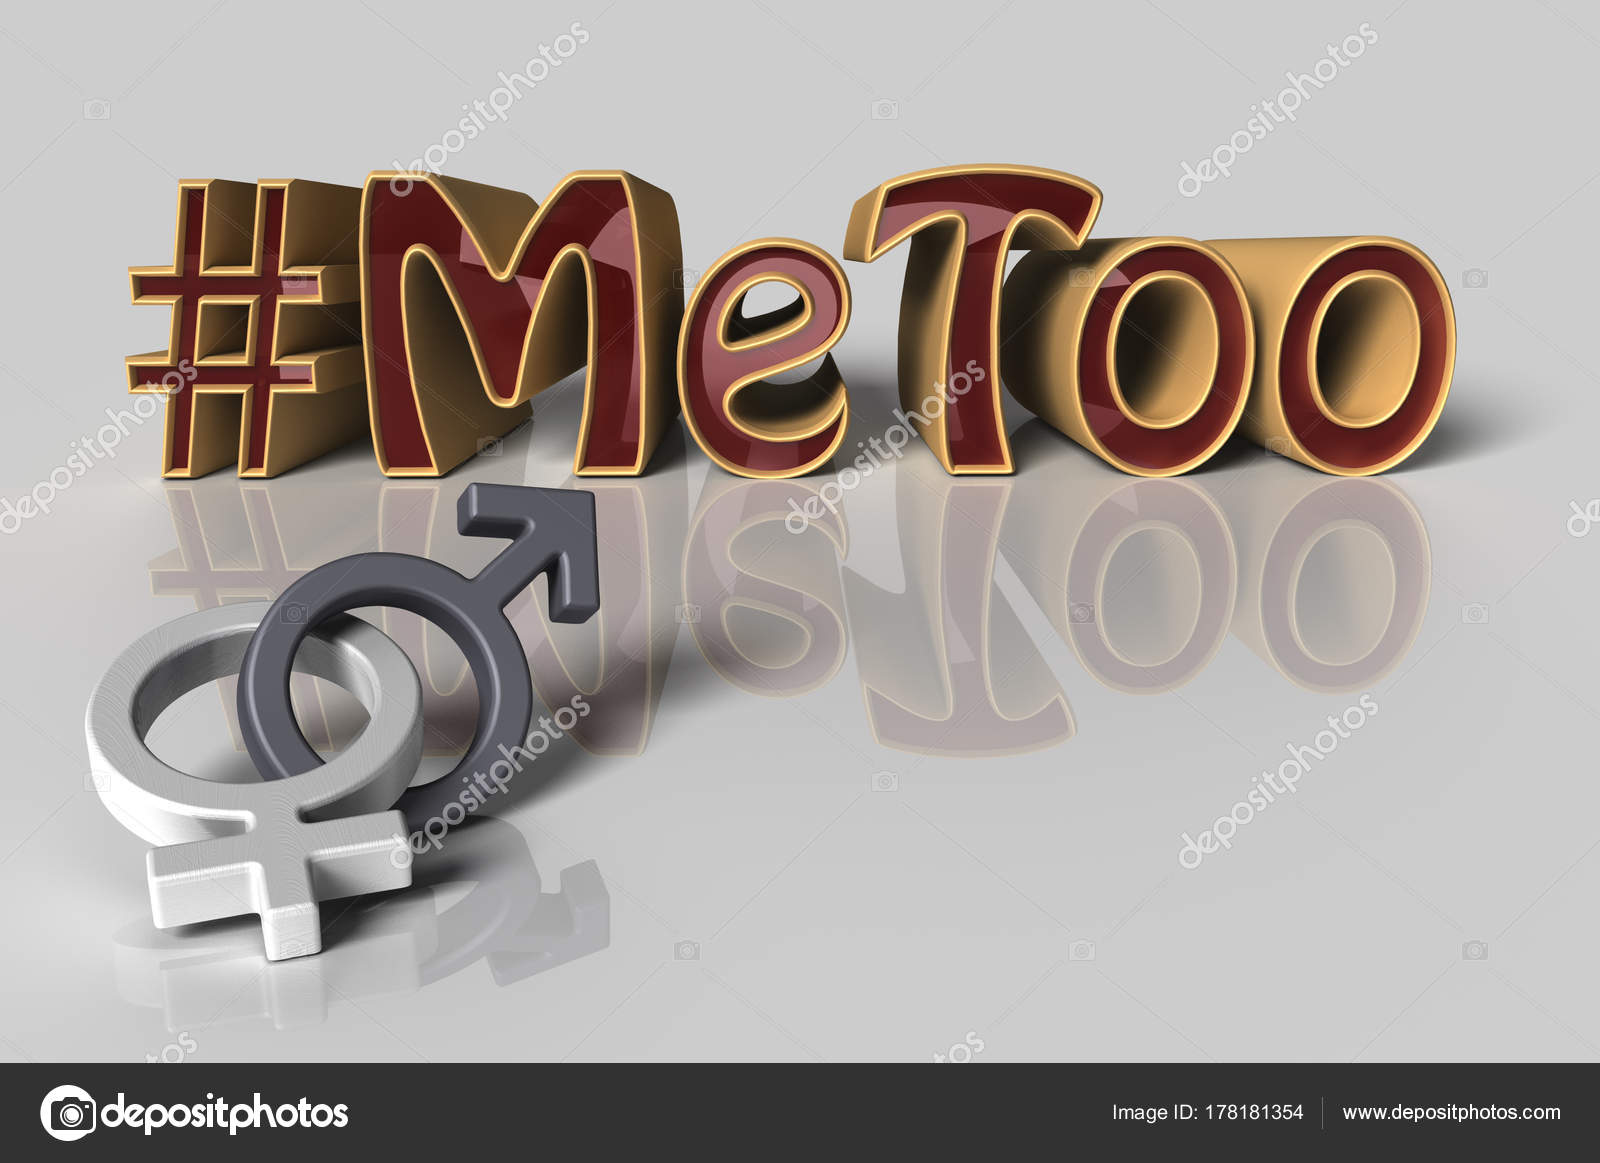 3d Illustration Hashtag Me Too With Male And Female Symbols